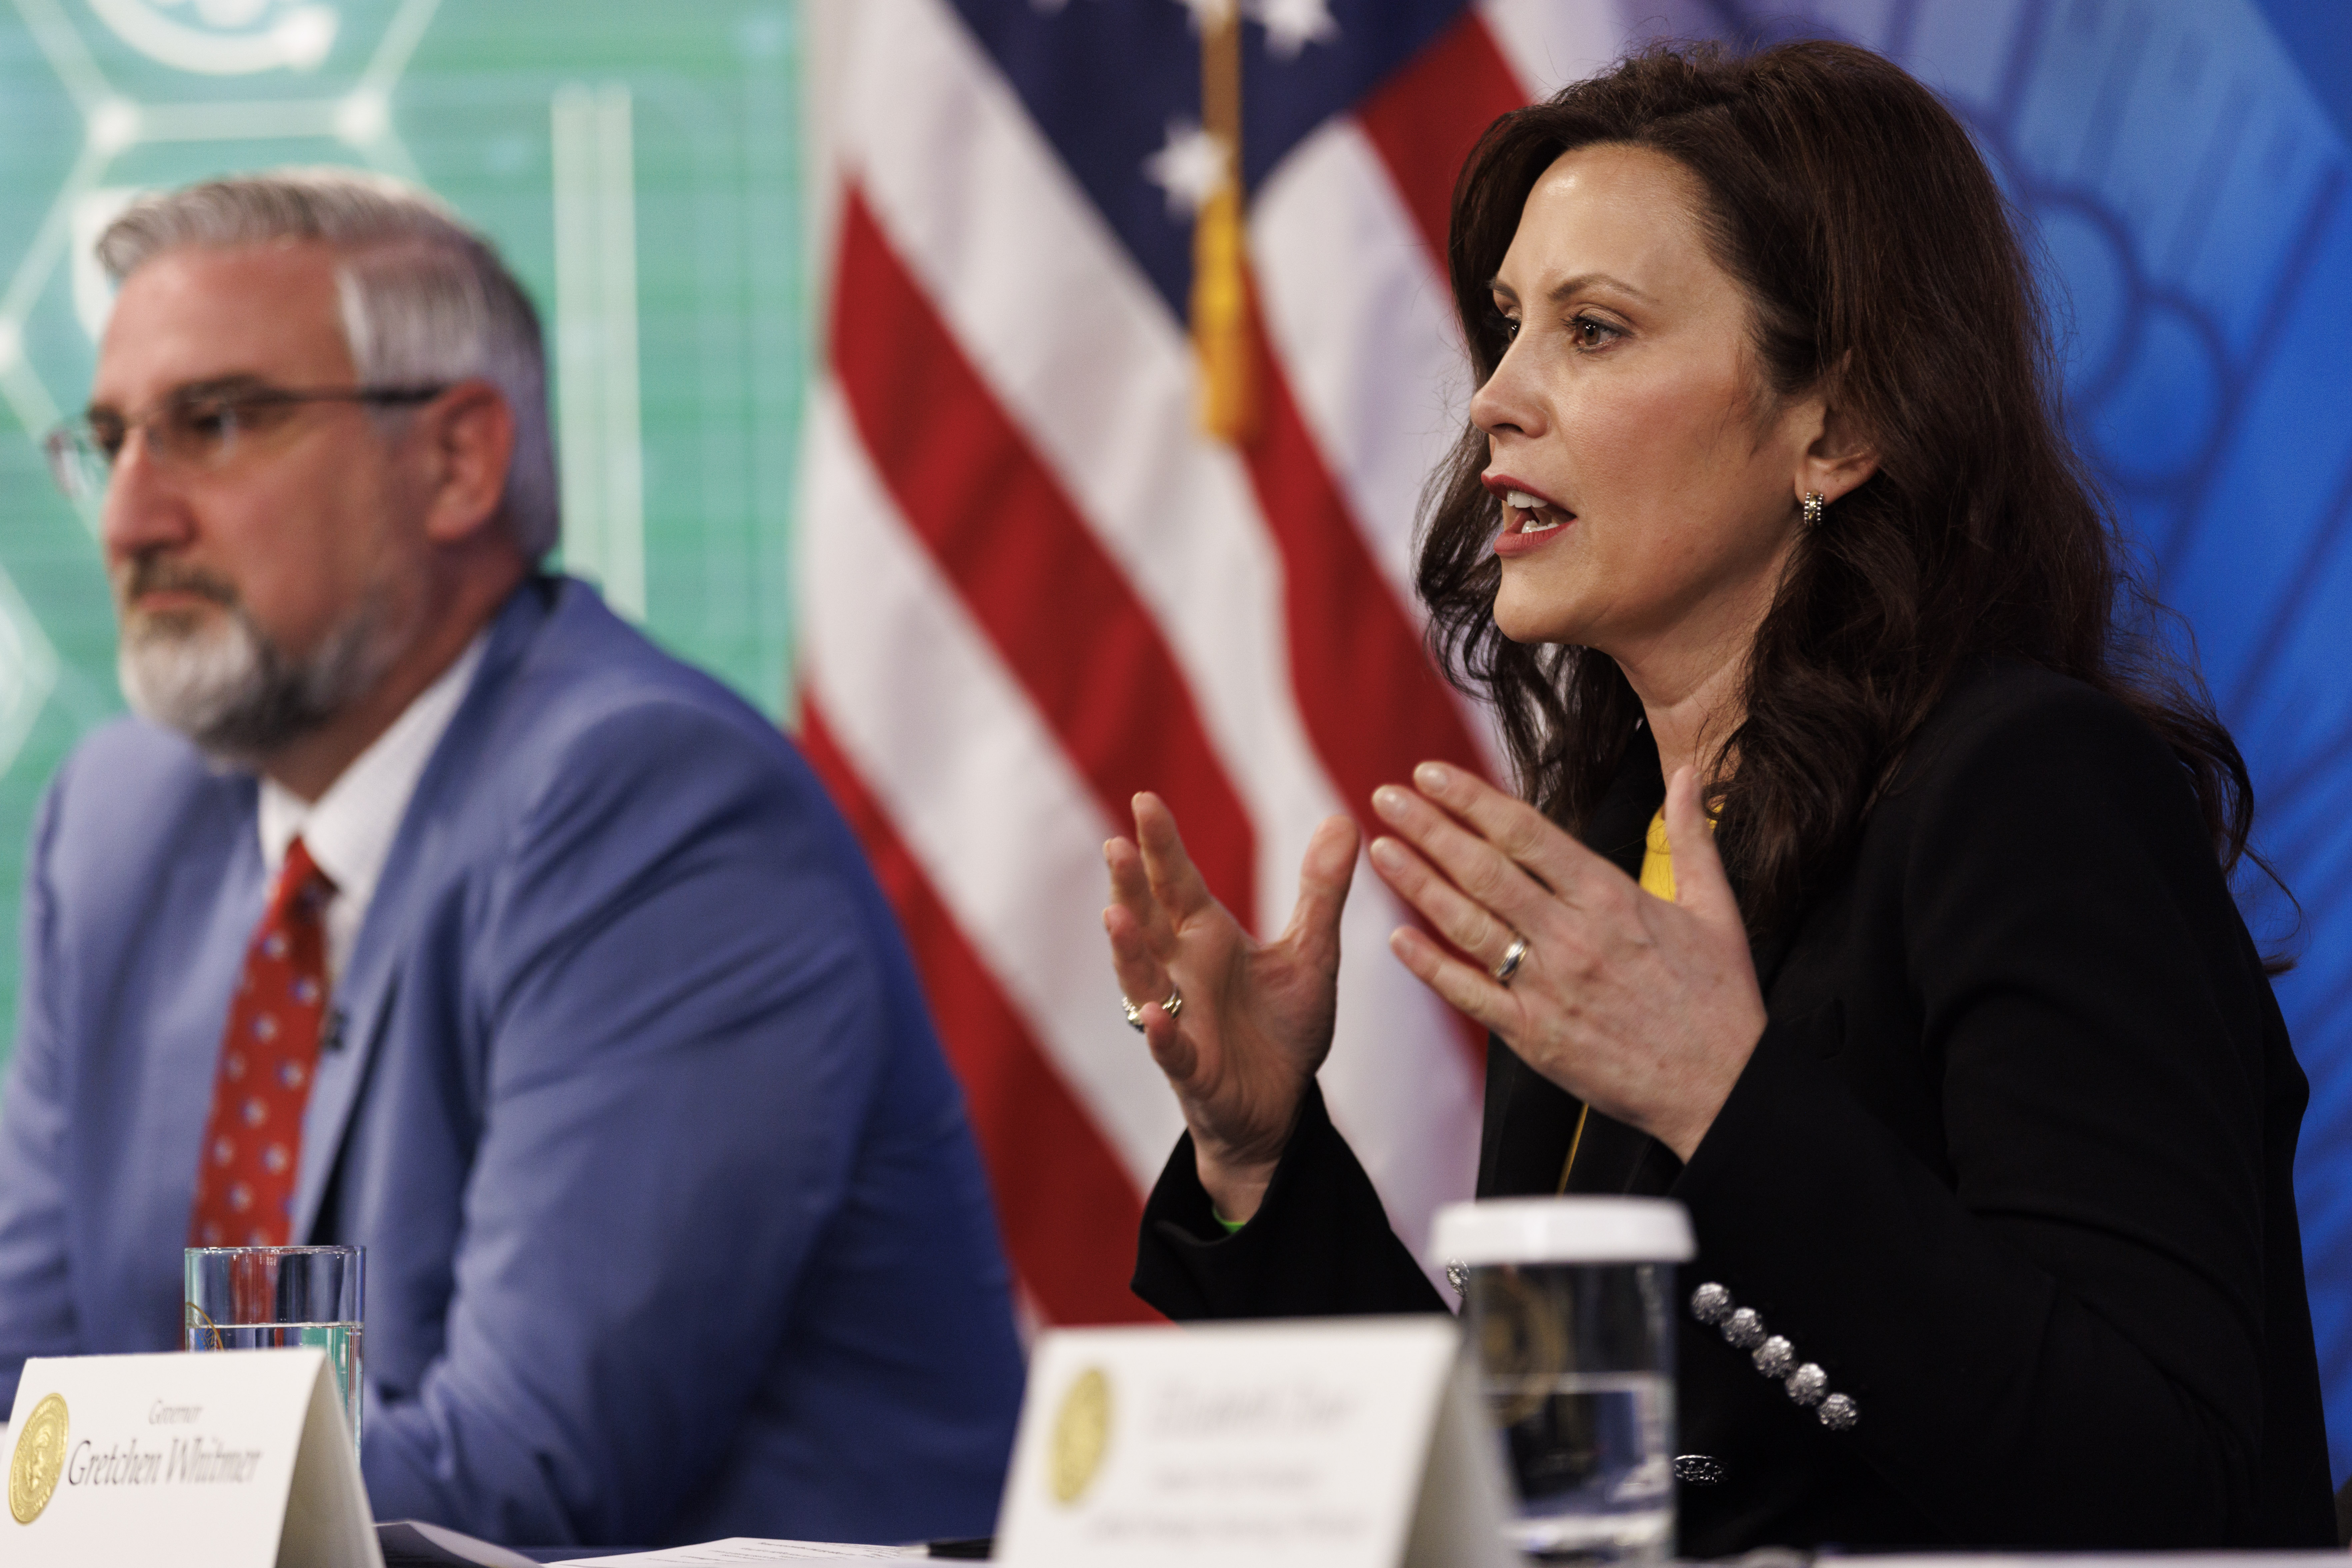 Michigan Gov. Whitmer Urges Congress To Lower Healthcare Costs